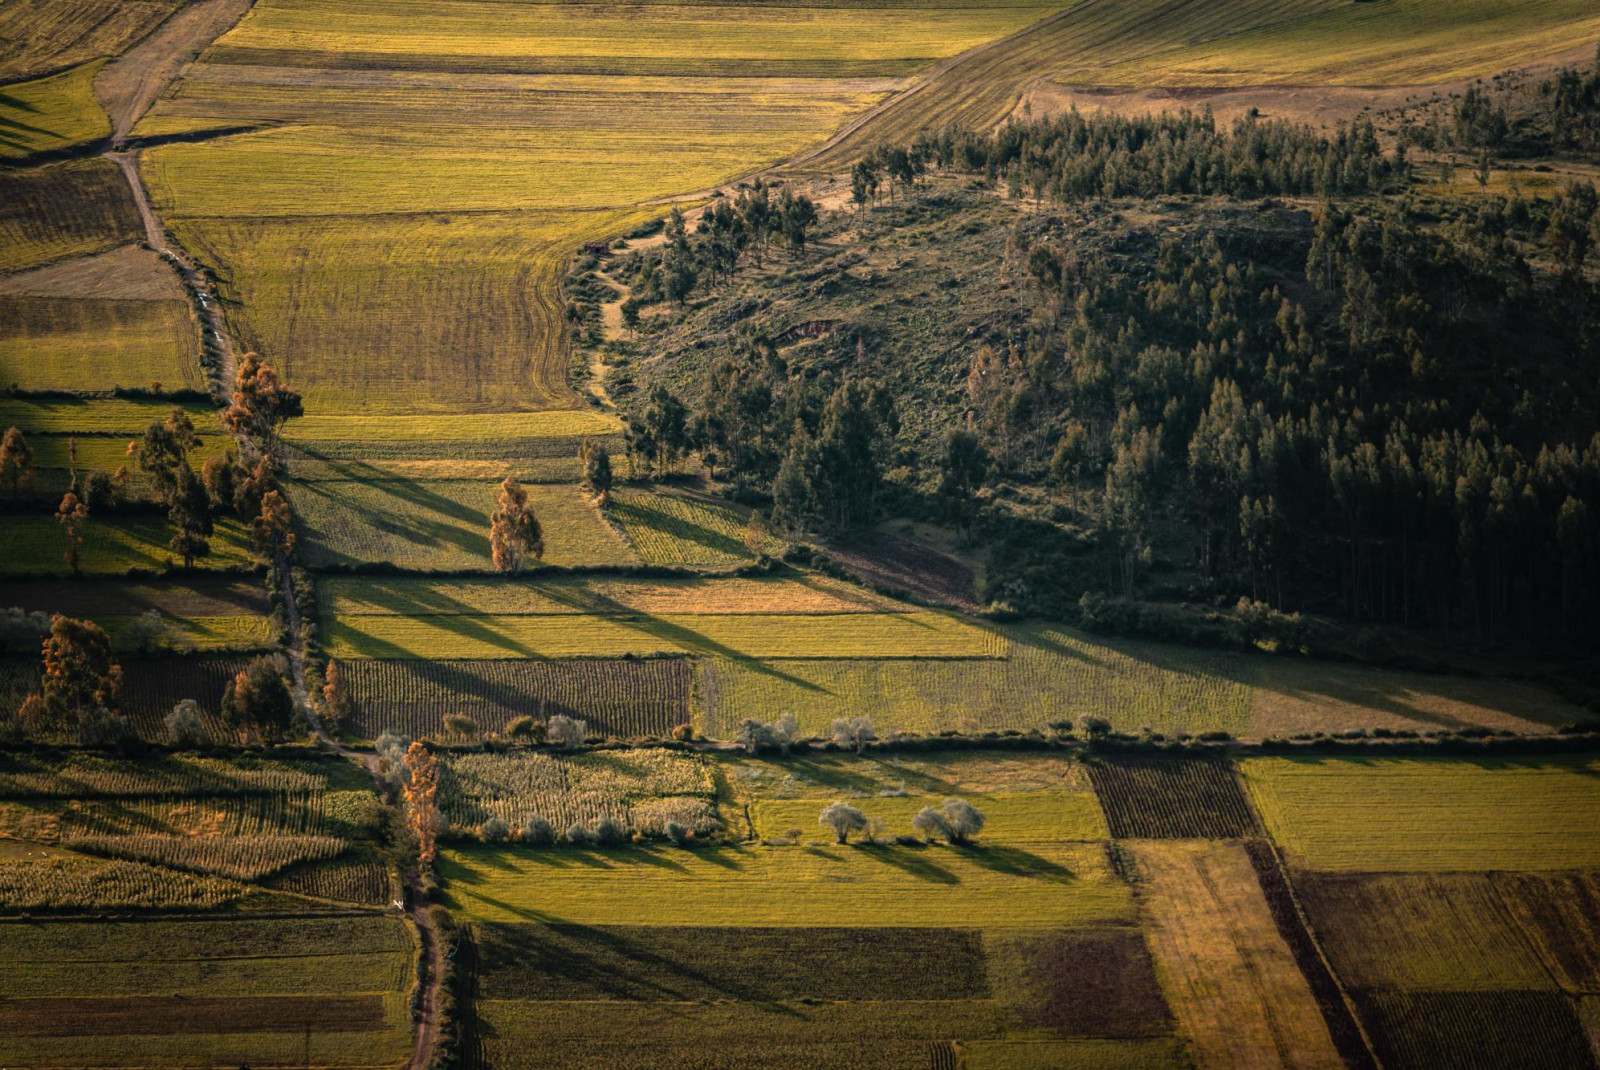 Countryside in Peru during golden hour.